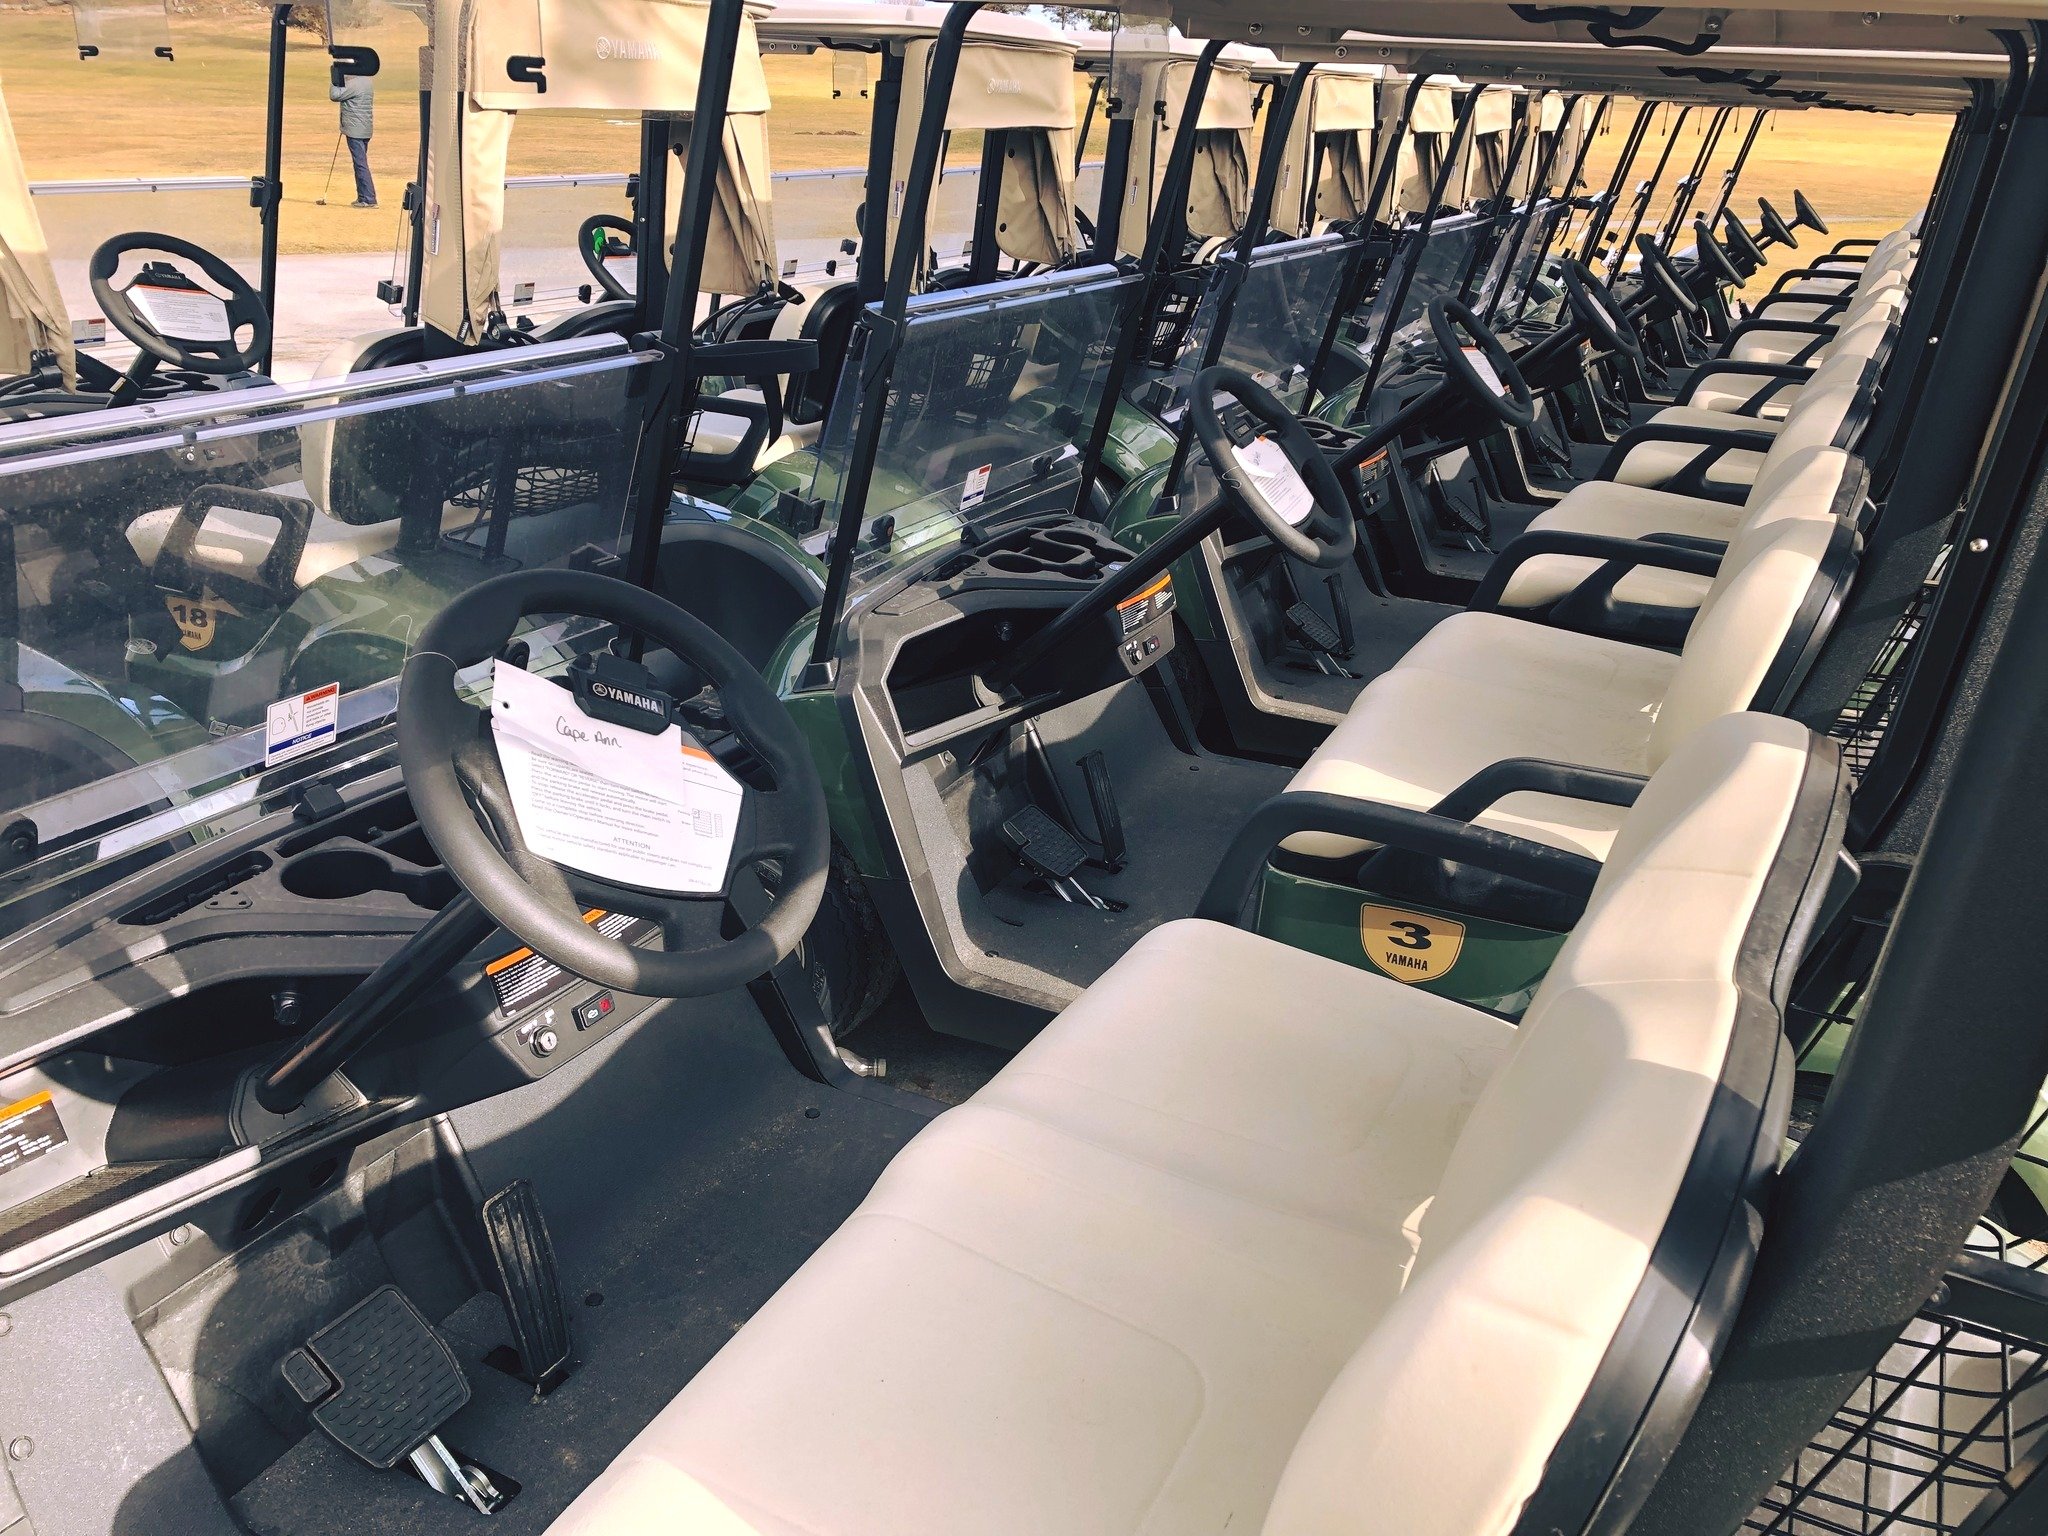 CHEERS to Cape Ann Golf Club&rsquo;s 93rd Season! ⛳️ We&rsquo;re kicking it off with a fresh NEW fleet of Club Cars available for rent. Please note ALL Players are required to complete CAGC Car Rental Receipt Form with each use. This policy includes 